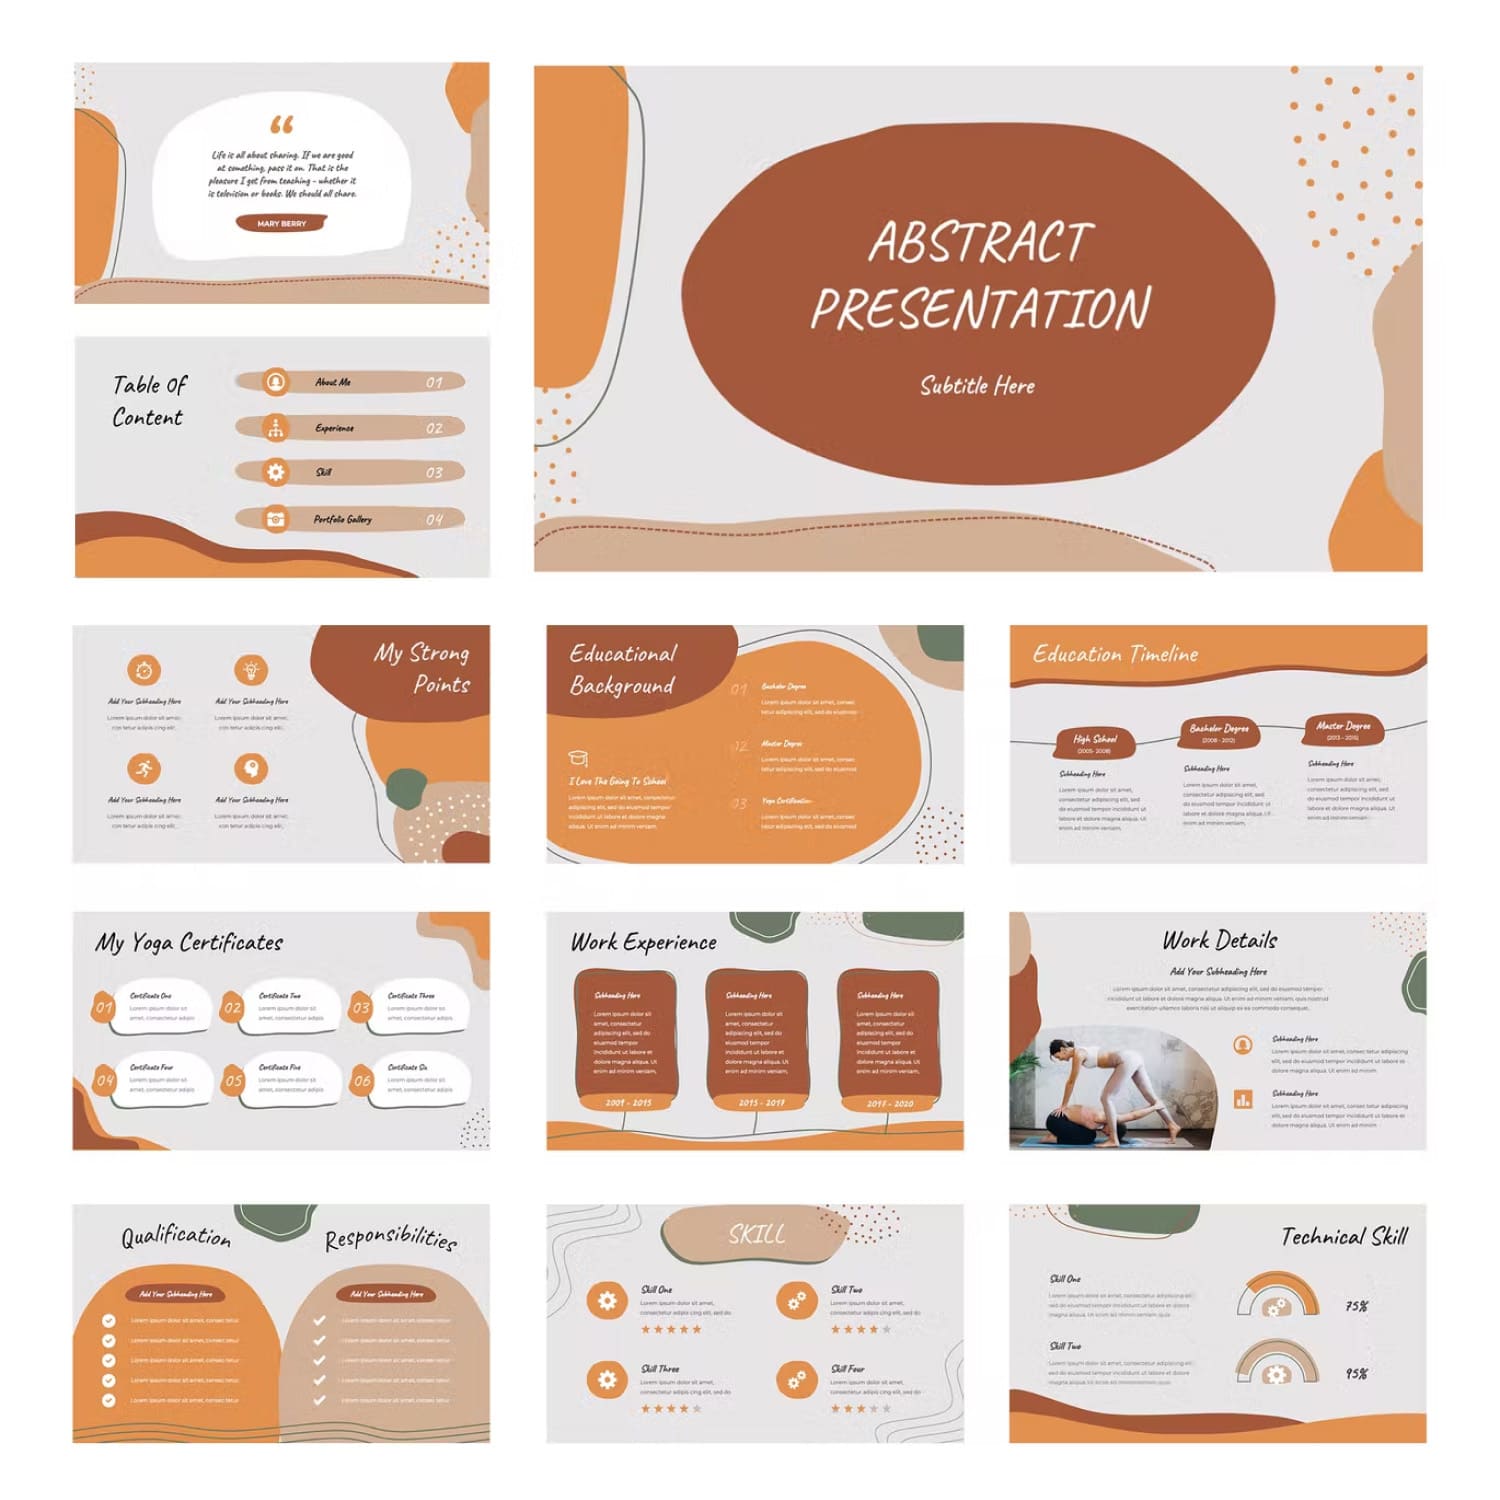 Abstract powerpoint presentation template from 2sideswork.